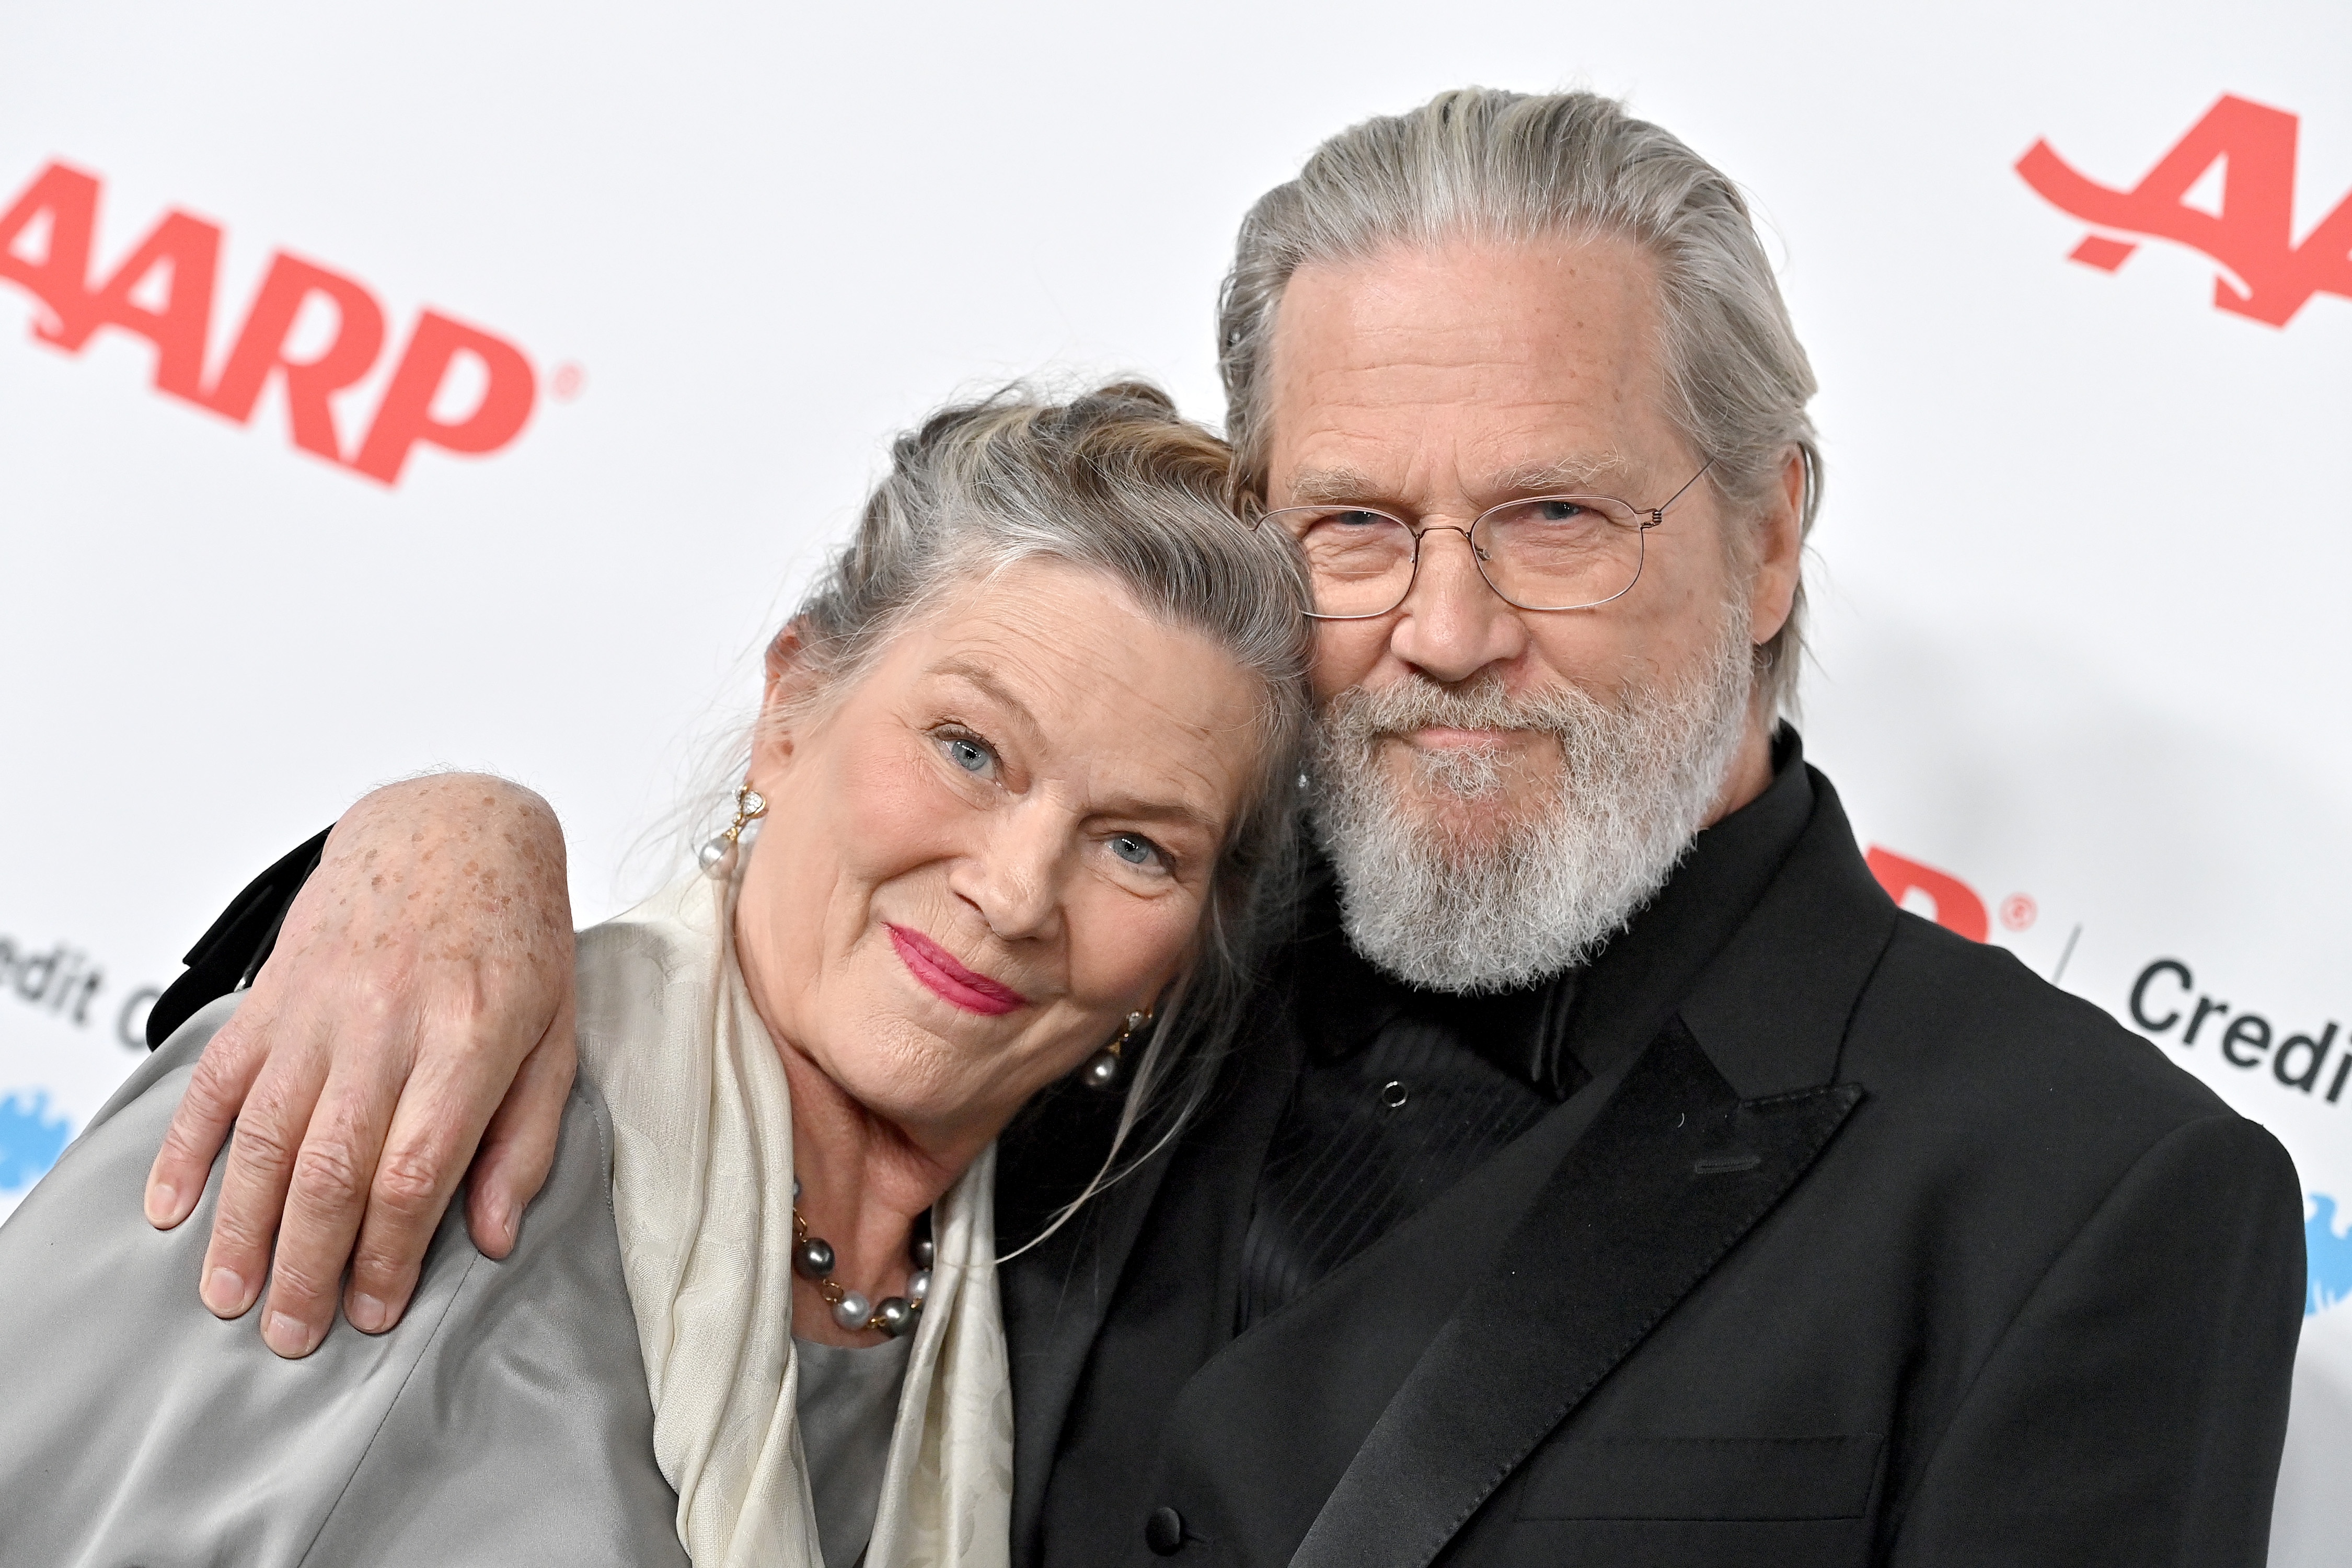 Jeff Bridges and Susan Geston at the "AARP The Magazine's" 21st Annual Movies For Grownups Awards in California on January 28, 2023 | Source: Getty Images